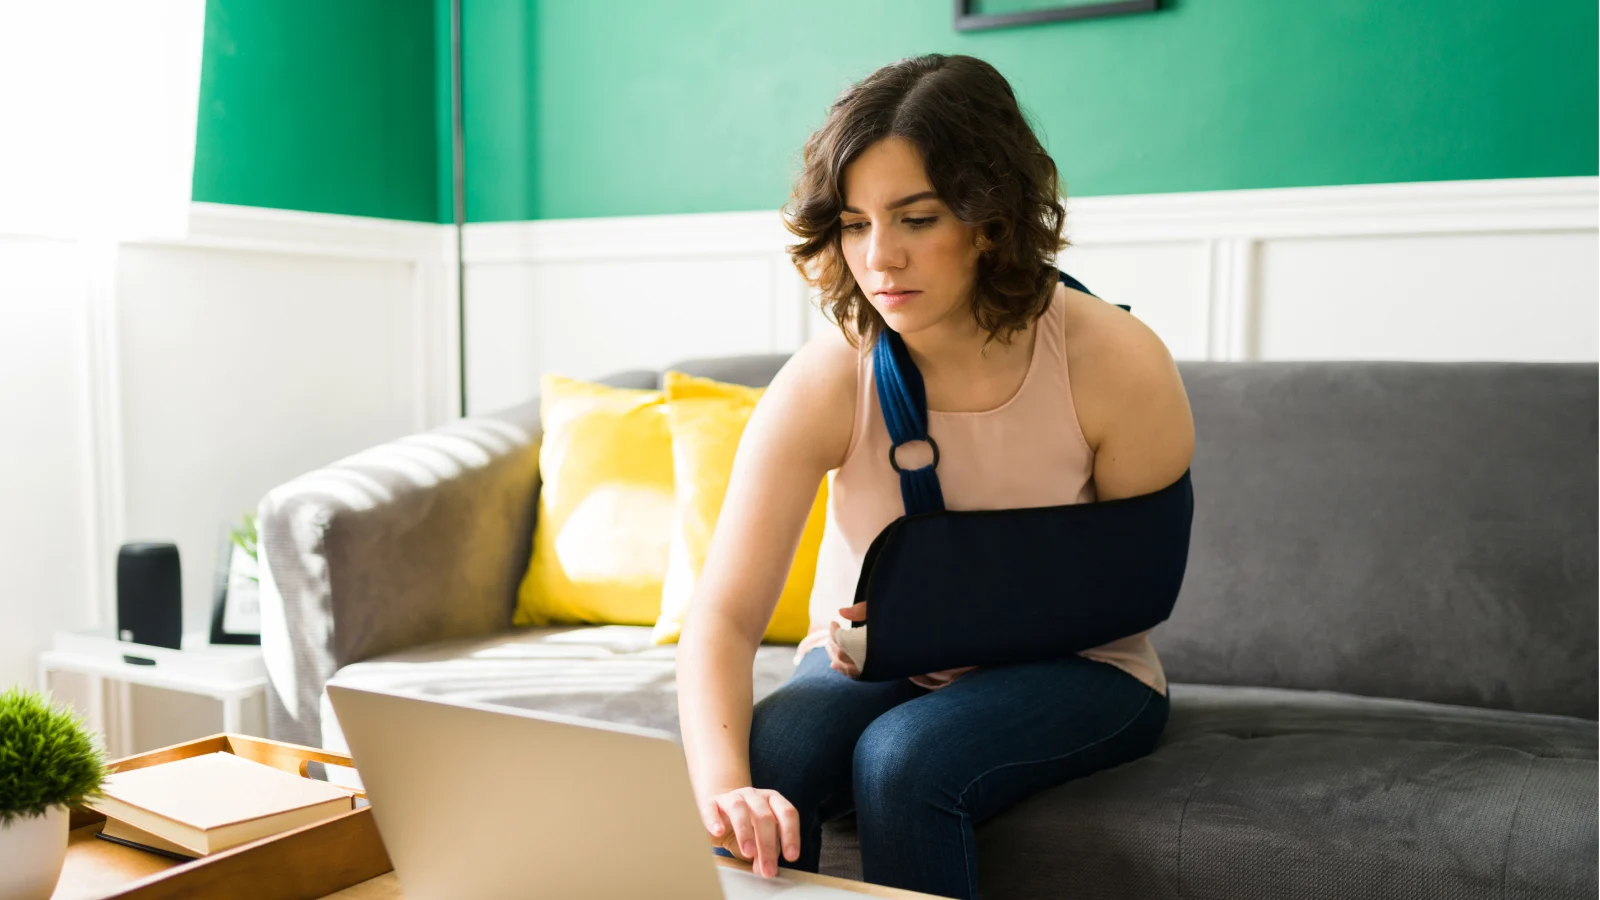 Young woman with arm sling using a laptop